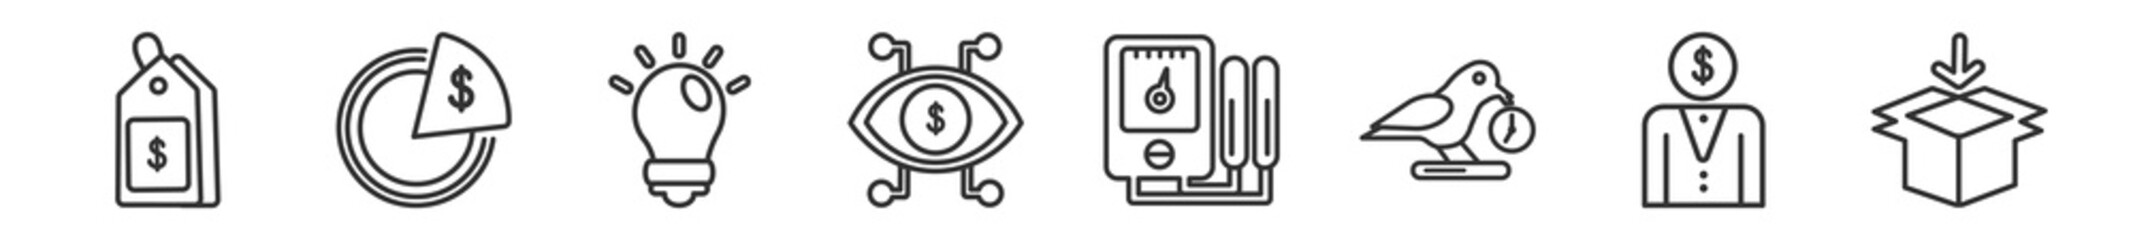 outline set of crowdfunding line icons. linear vector icons such as price tag, equity, creator, bionic contact lens, tester, packaging. vector illustration.